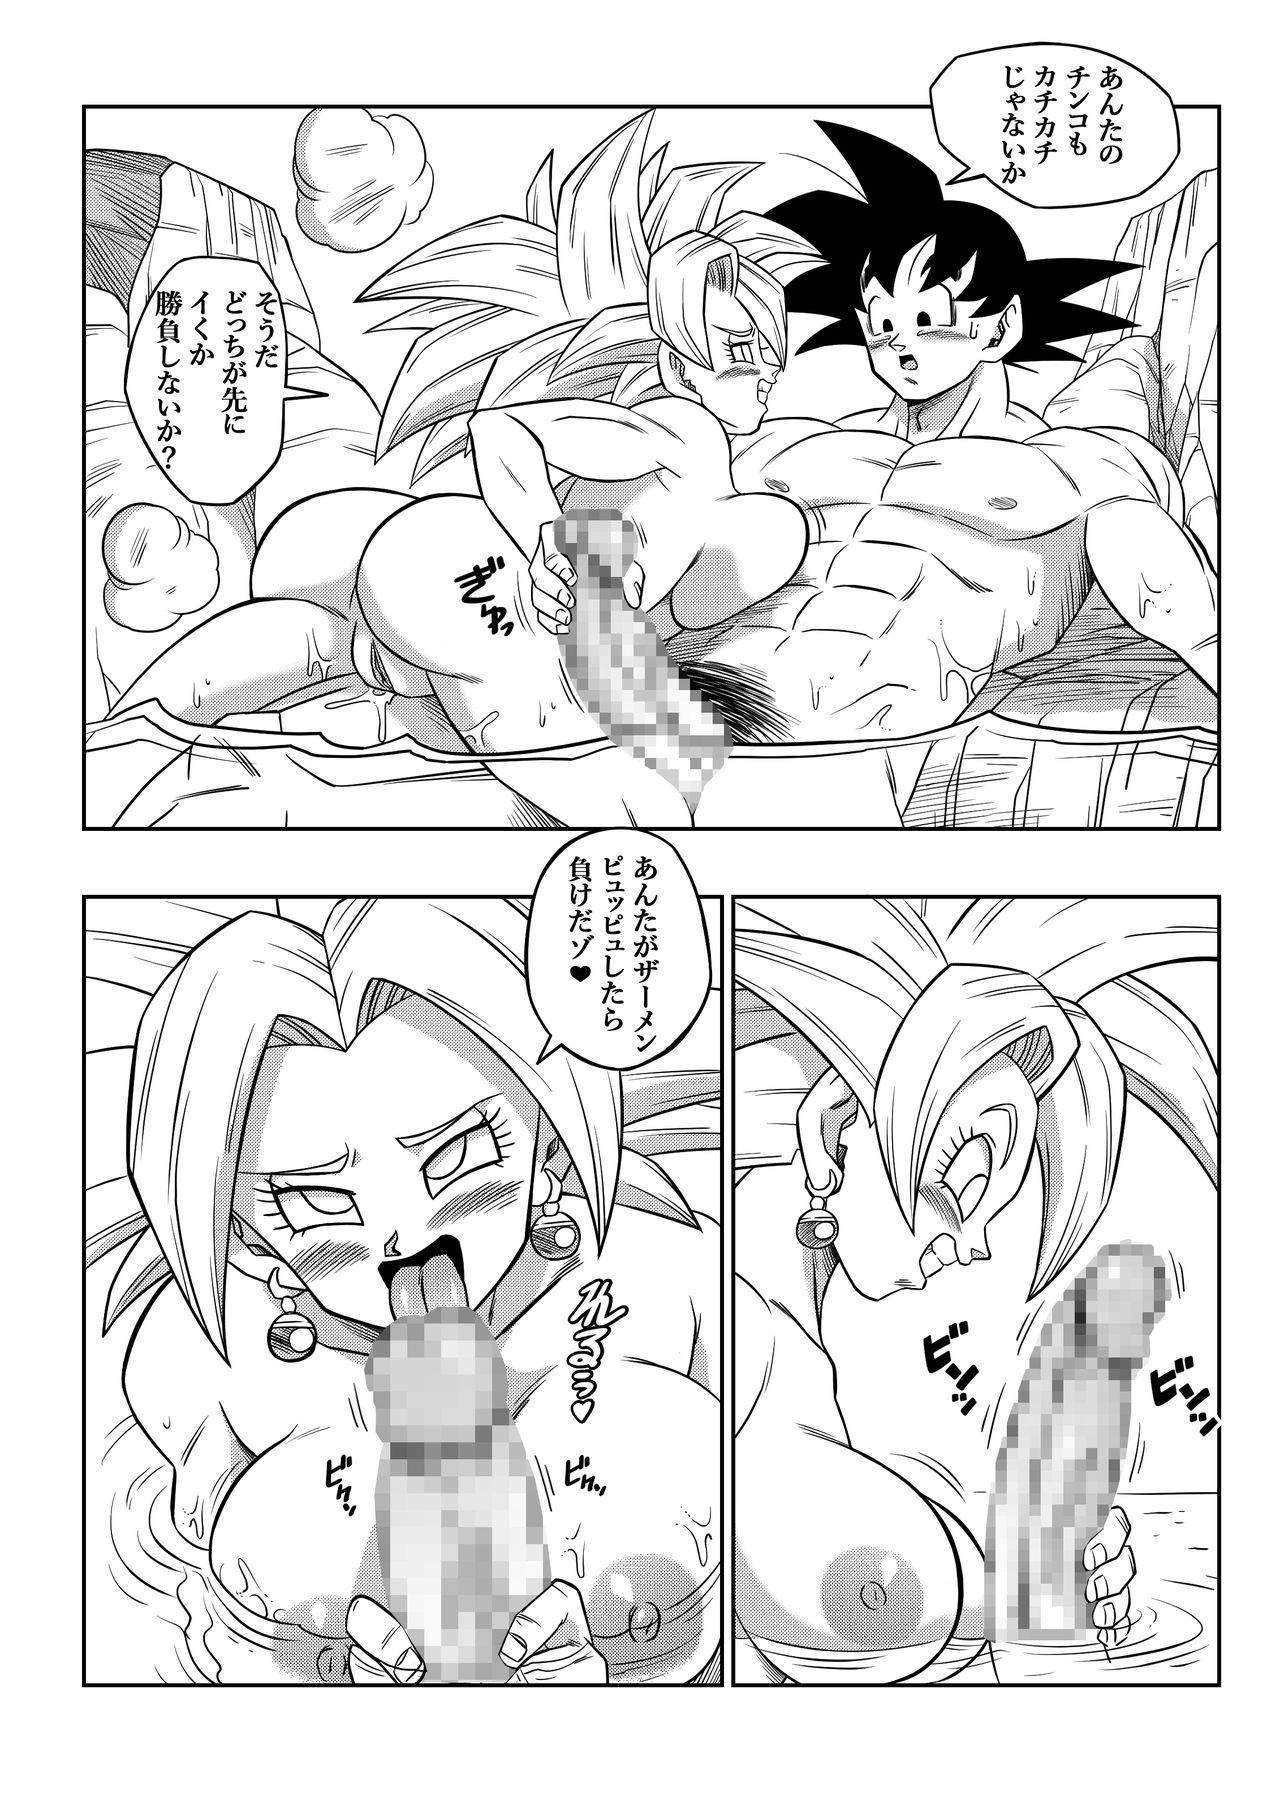 Dress Fight in the 6th Universe!!! - Dragon ball super Cams - Page 11